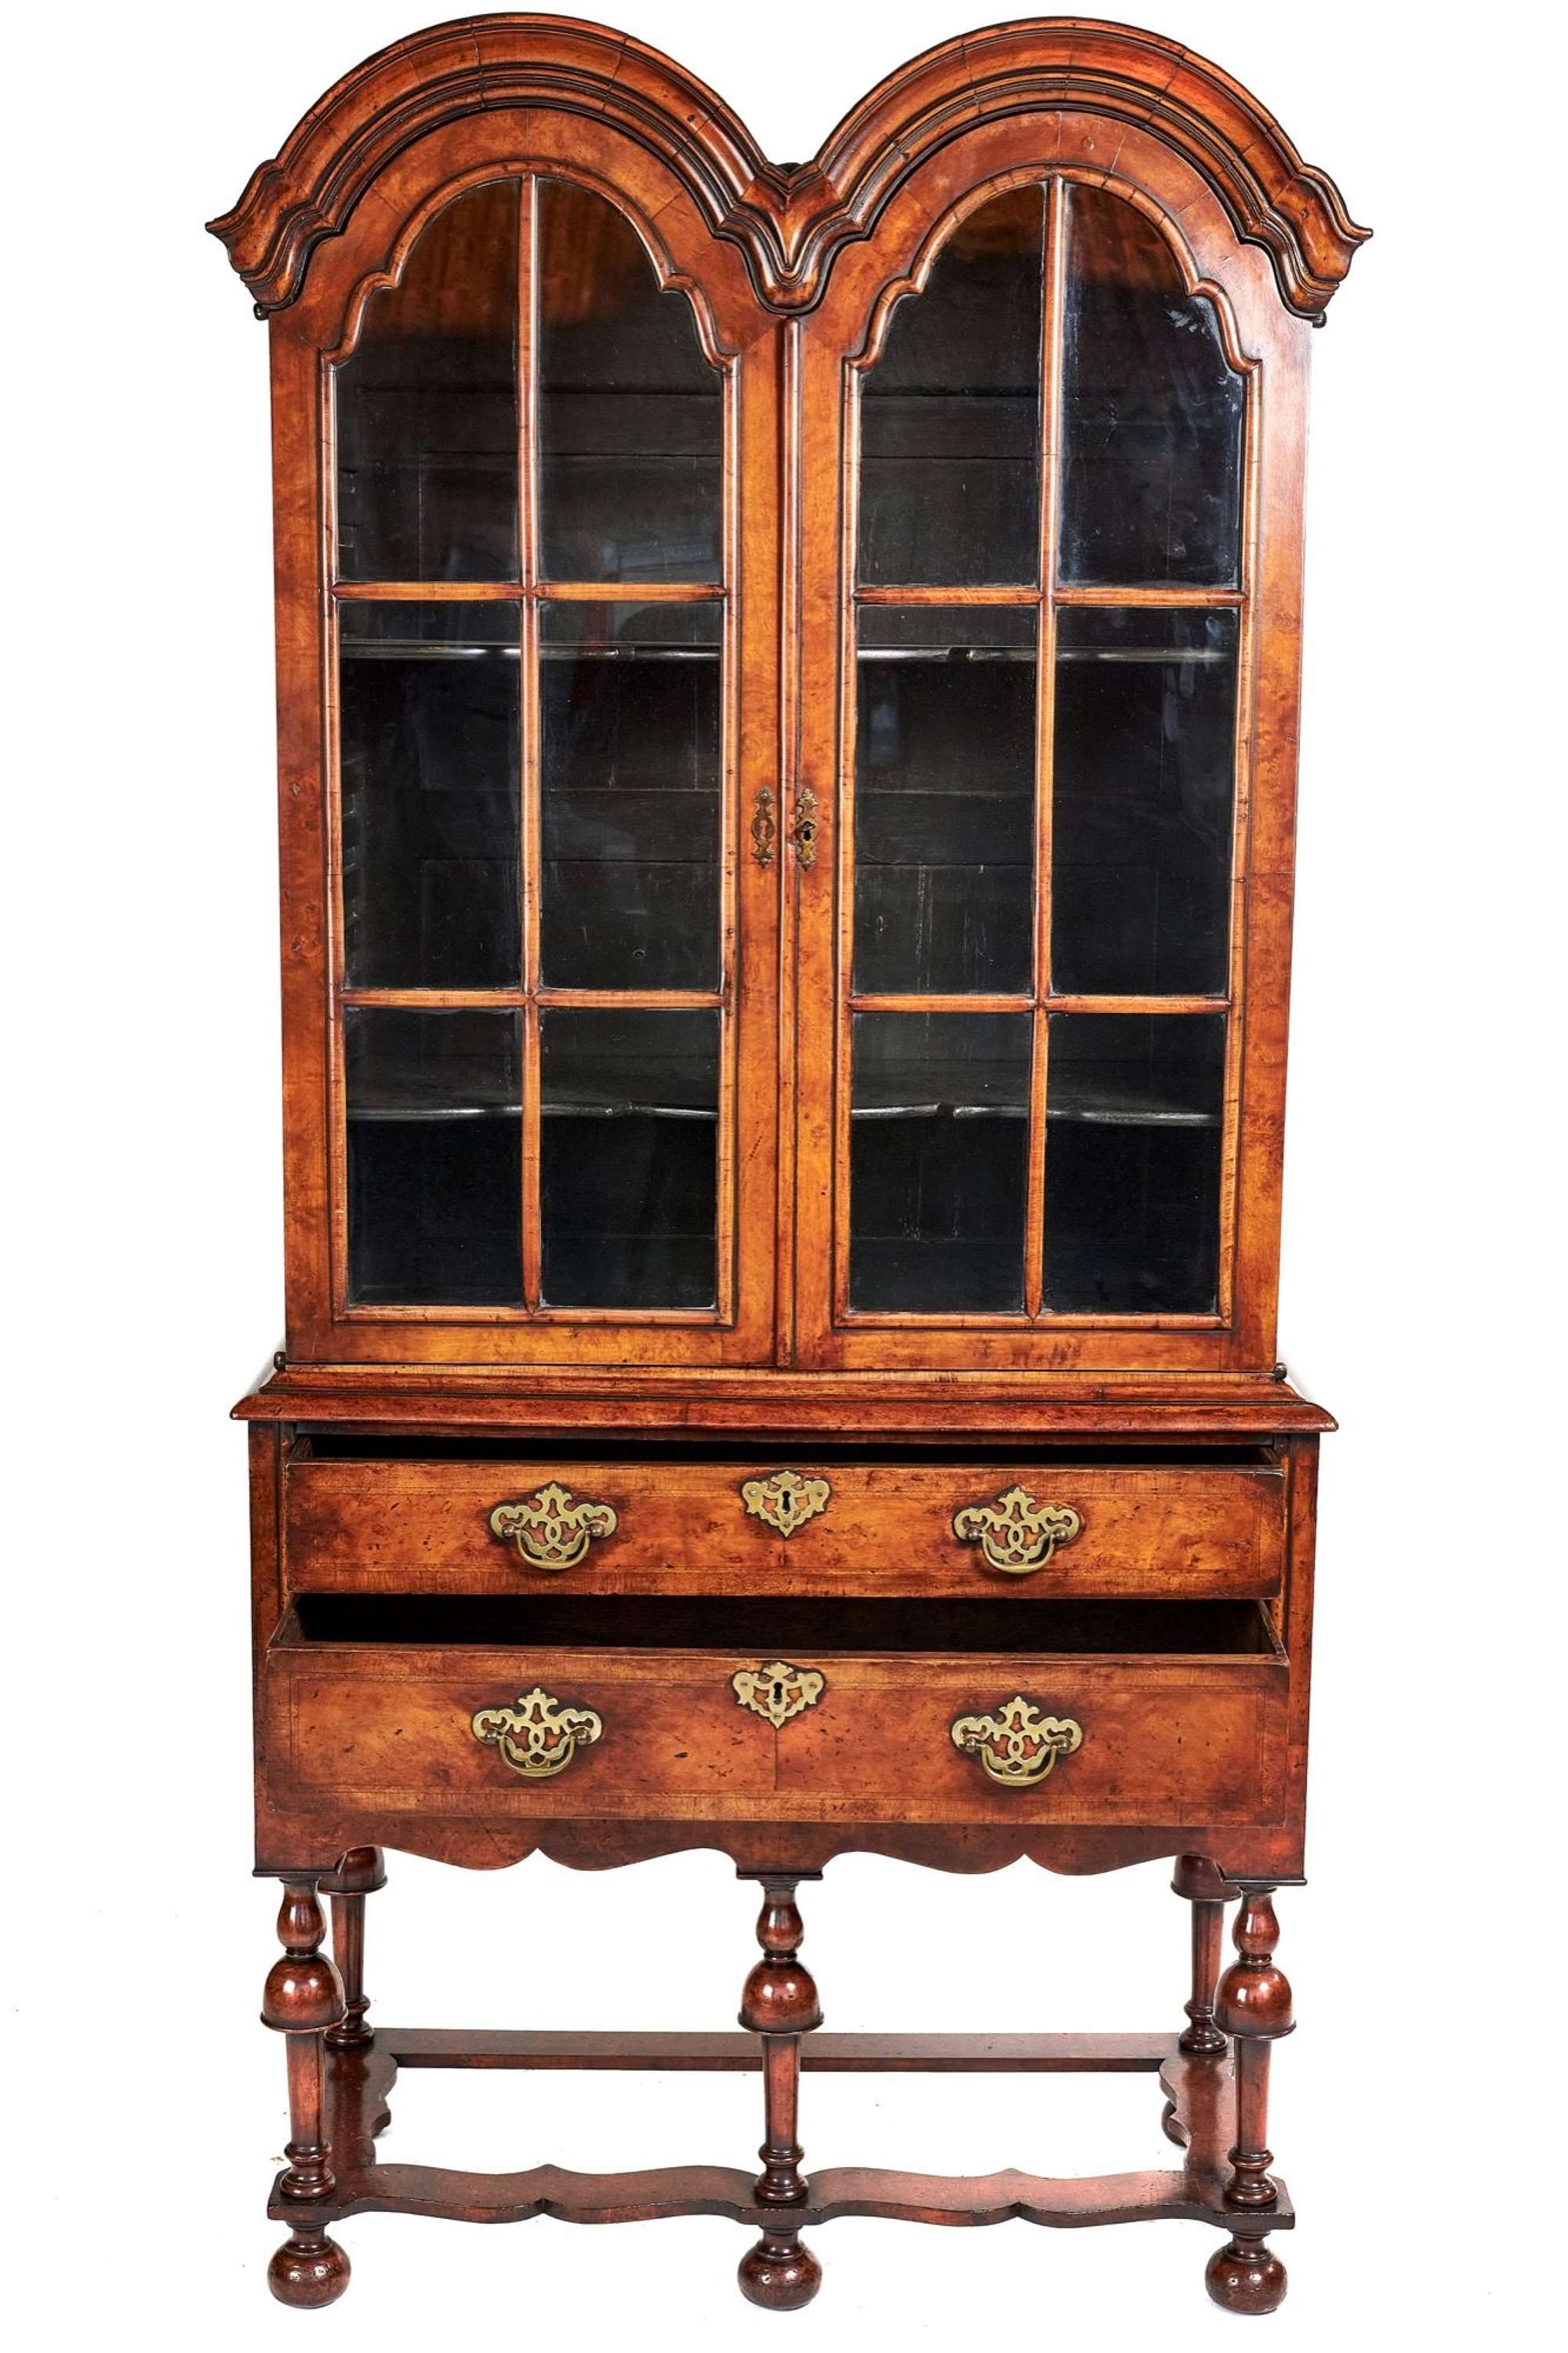 Antique walnut Queen Anne Revival Double dome Display cabinet circa 1900